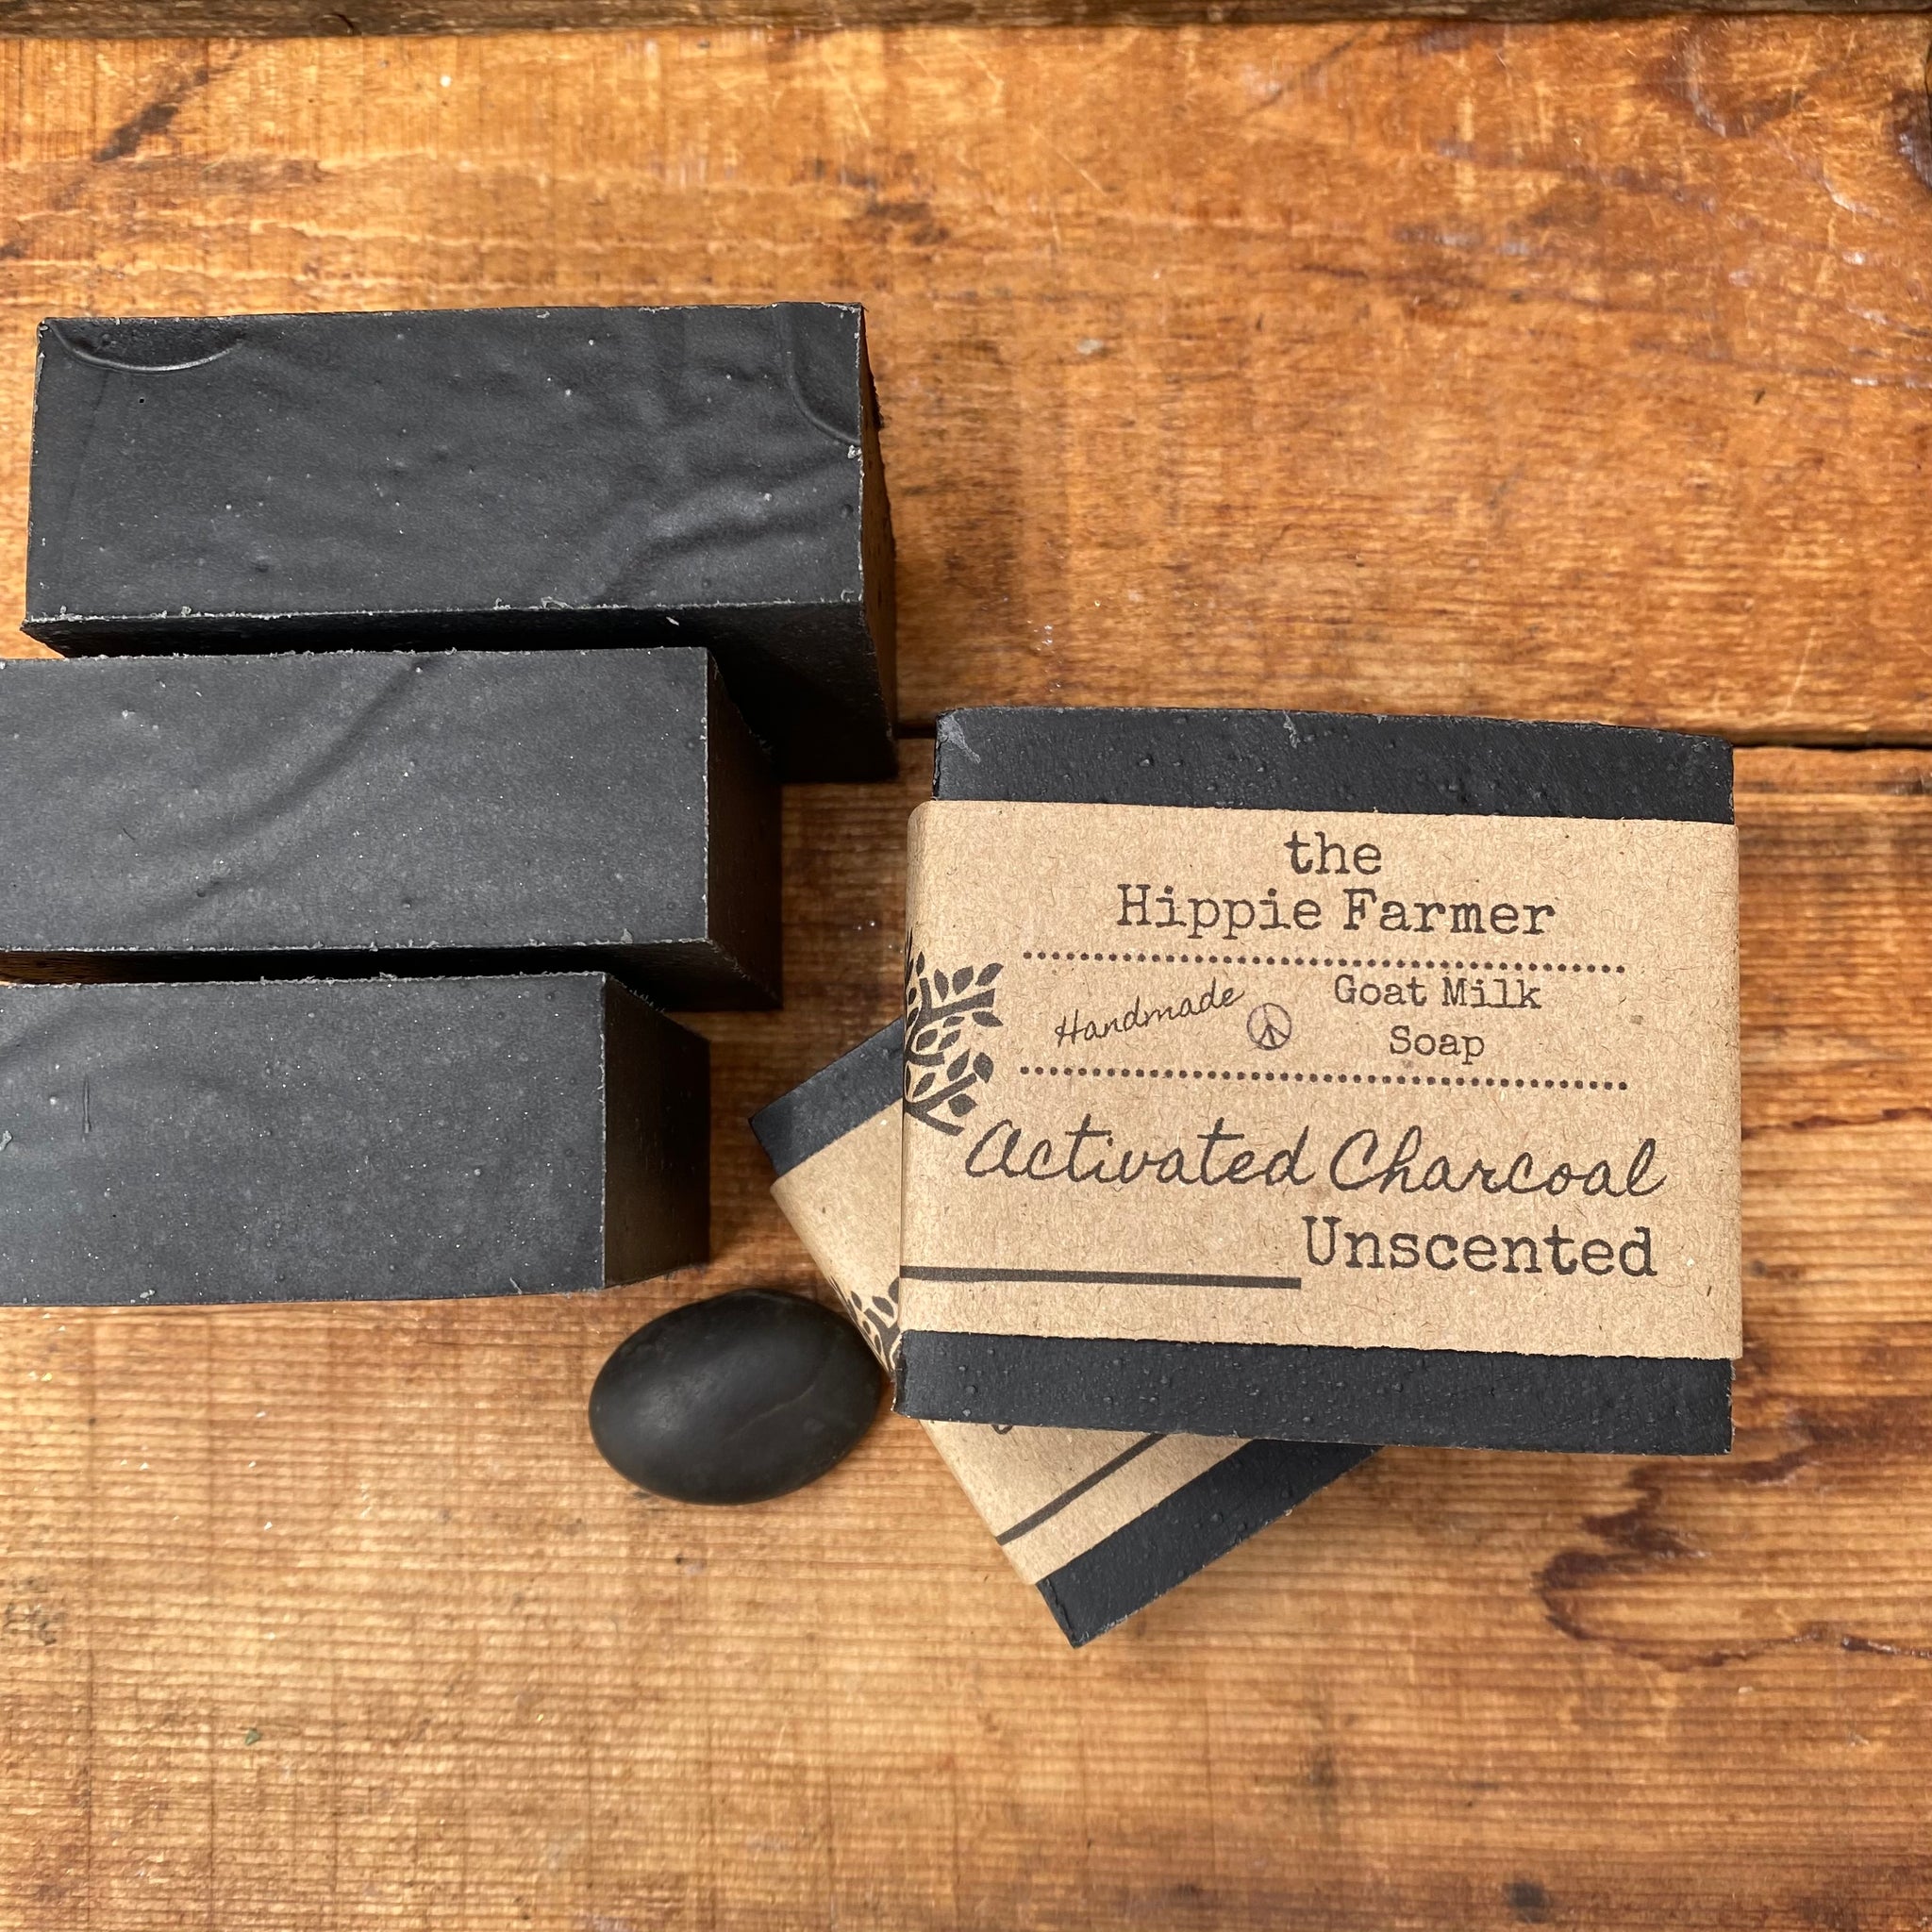 Pine Tar Soap with Goat Milk - Unscented 4.5 oz – The Hippie Farmer